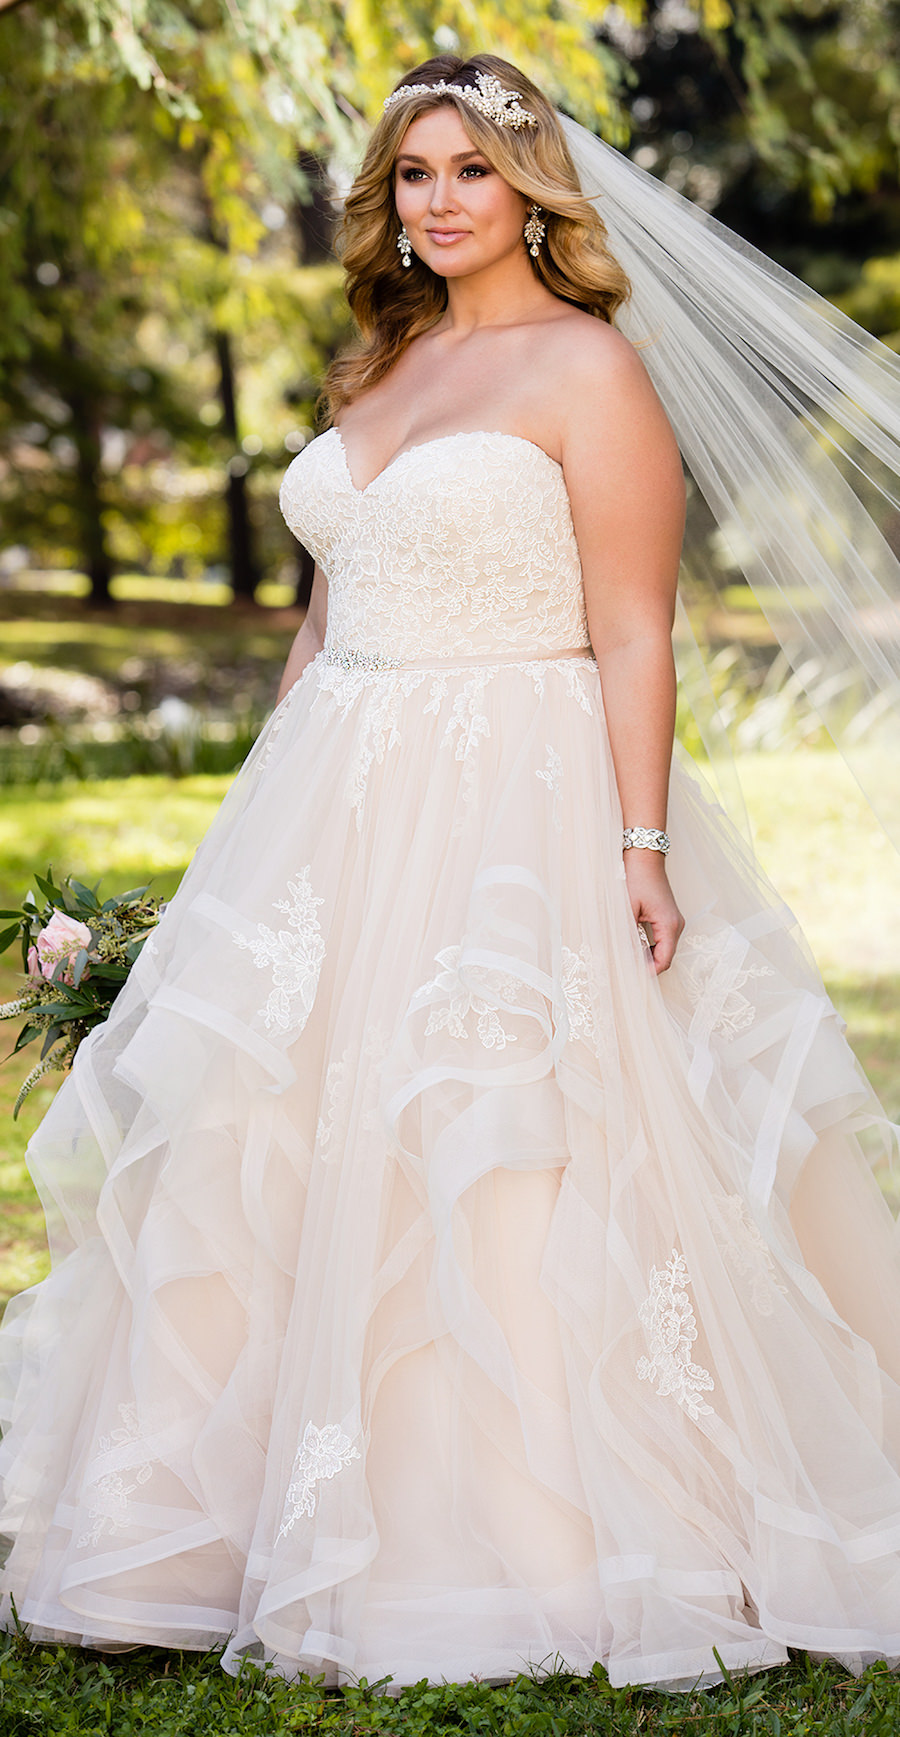 Plus Sizes Wedding Dresses Top Review Plus Sizes Wedding Dresses Find The Perfect Venue For